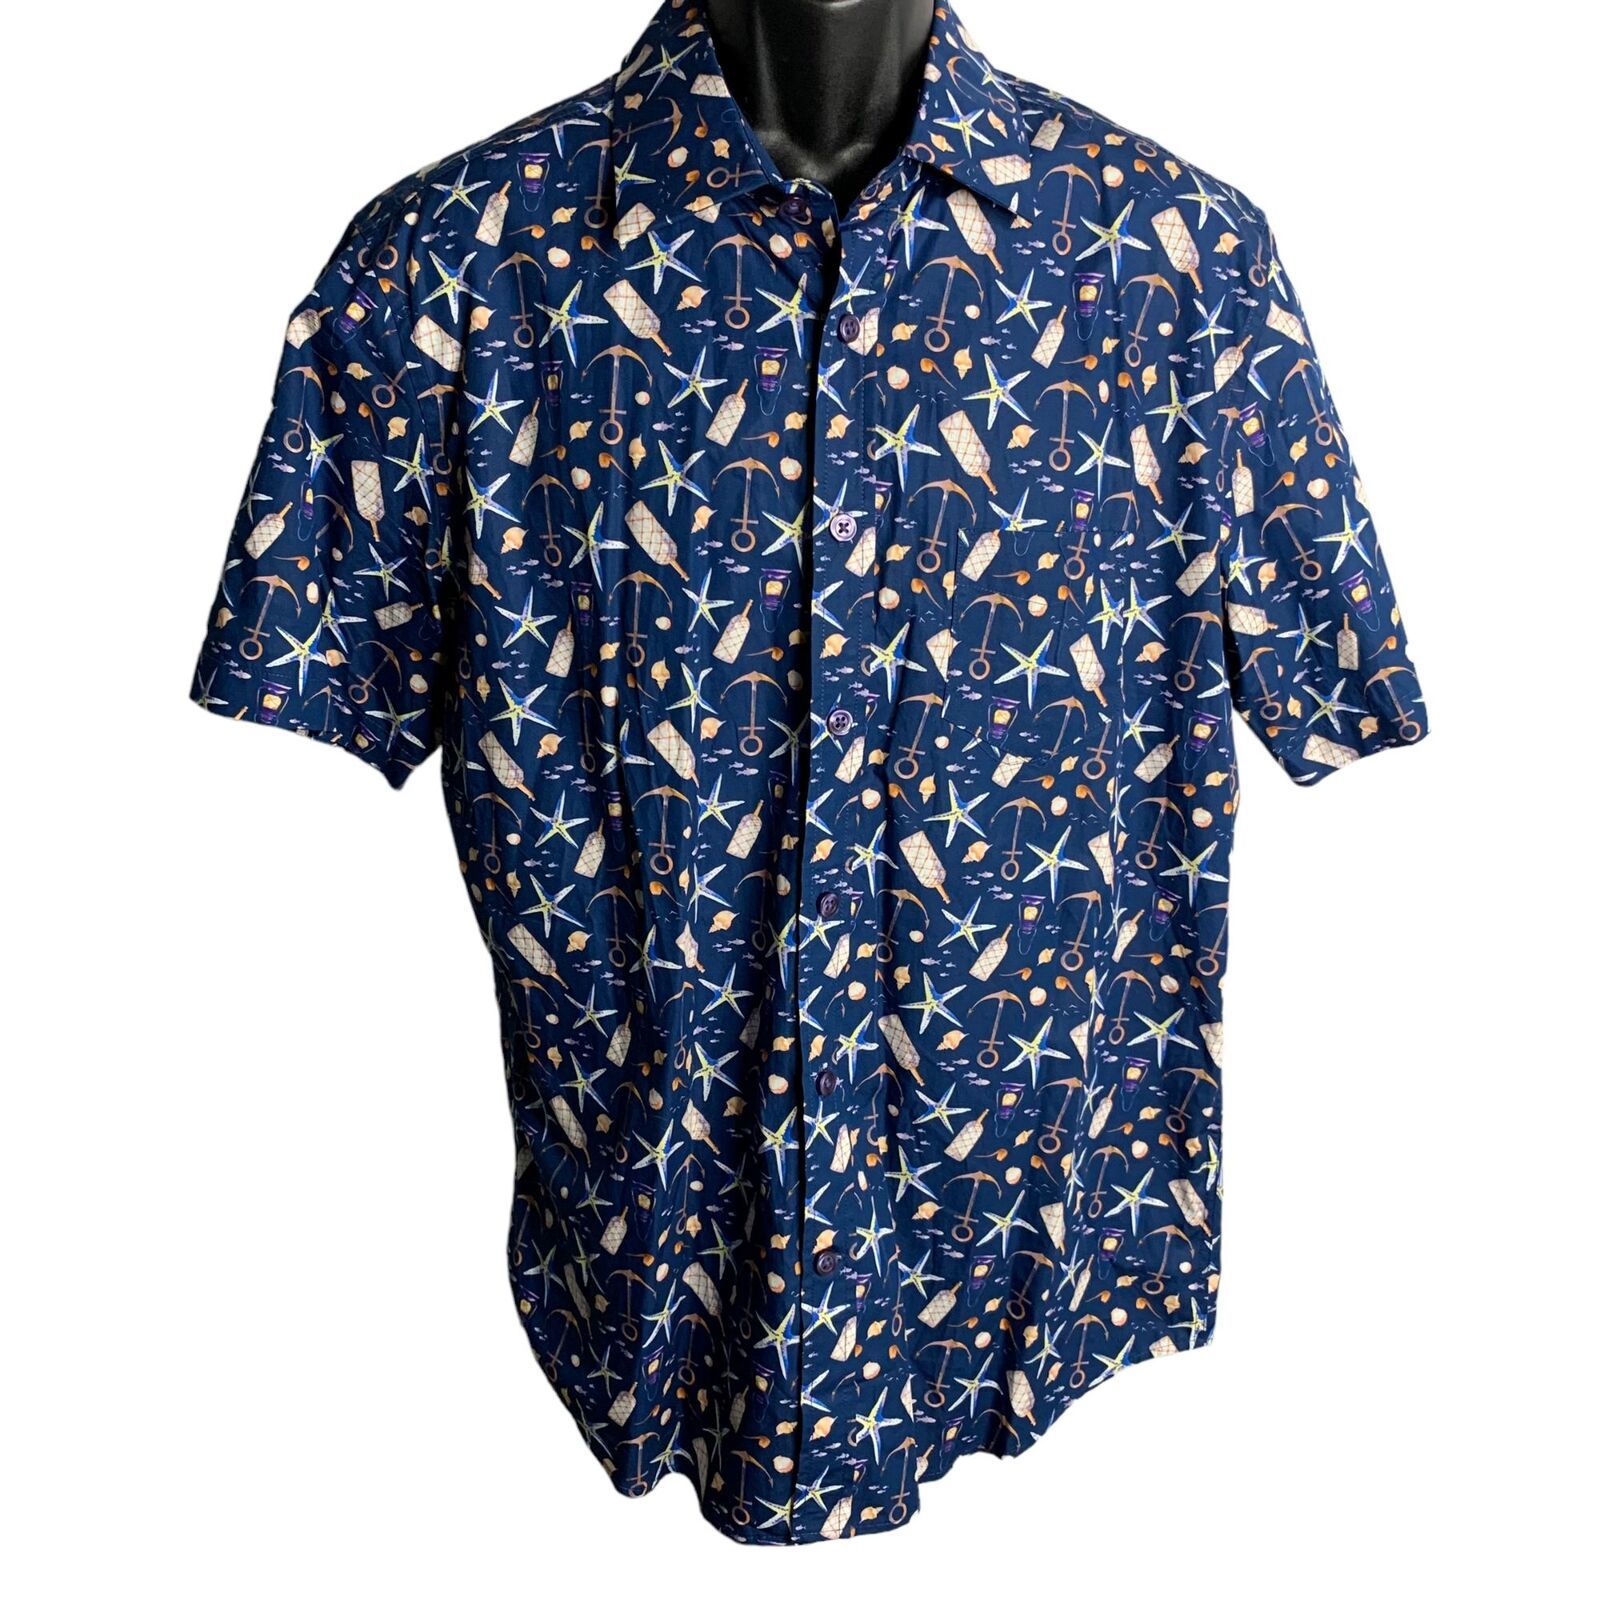 Primary image for Kennington Button Up Estate Shirt L Blue Sea Stories Short Sleeves Pockets